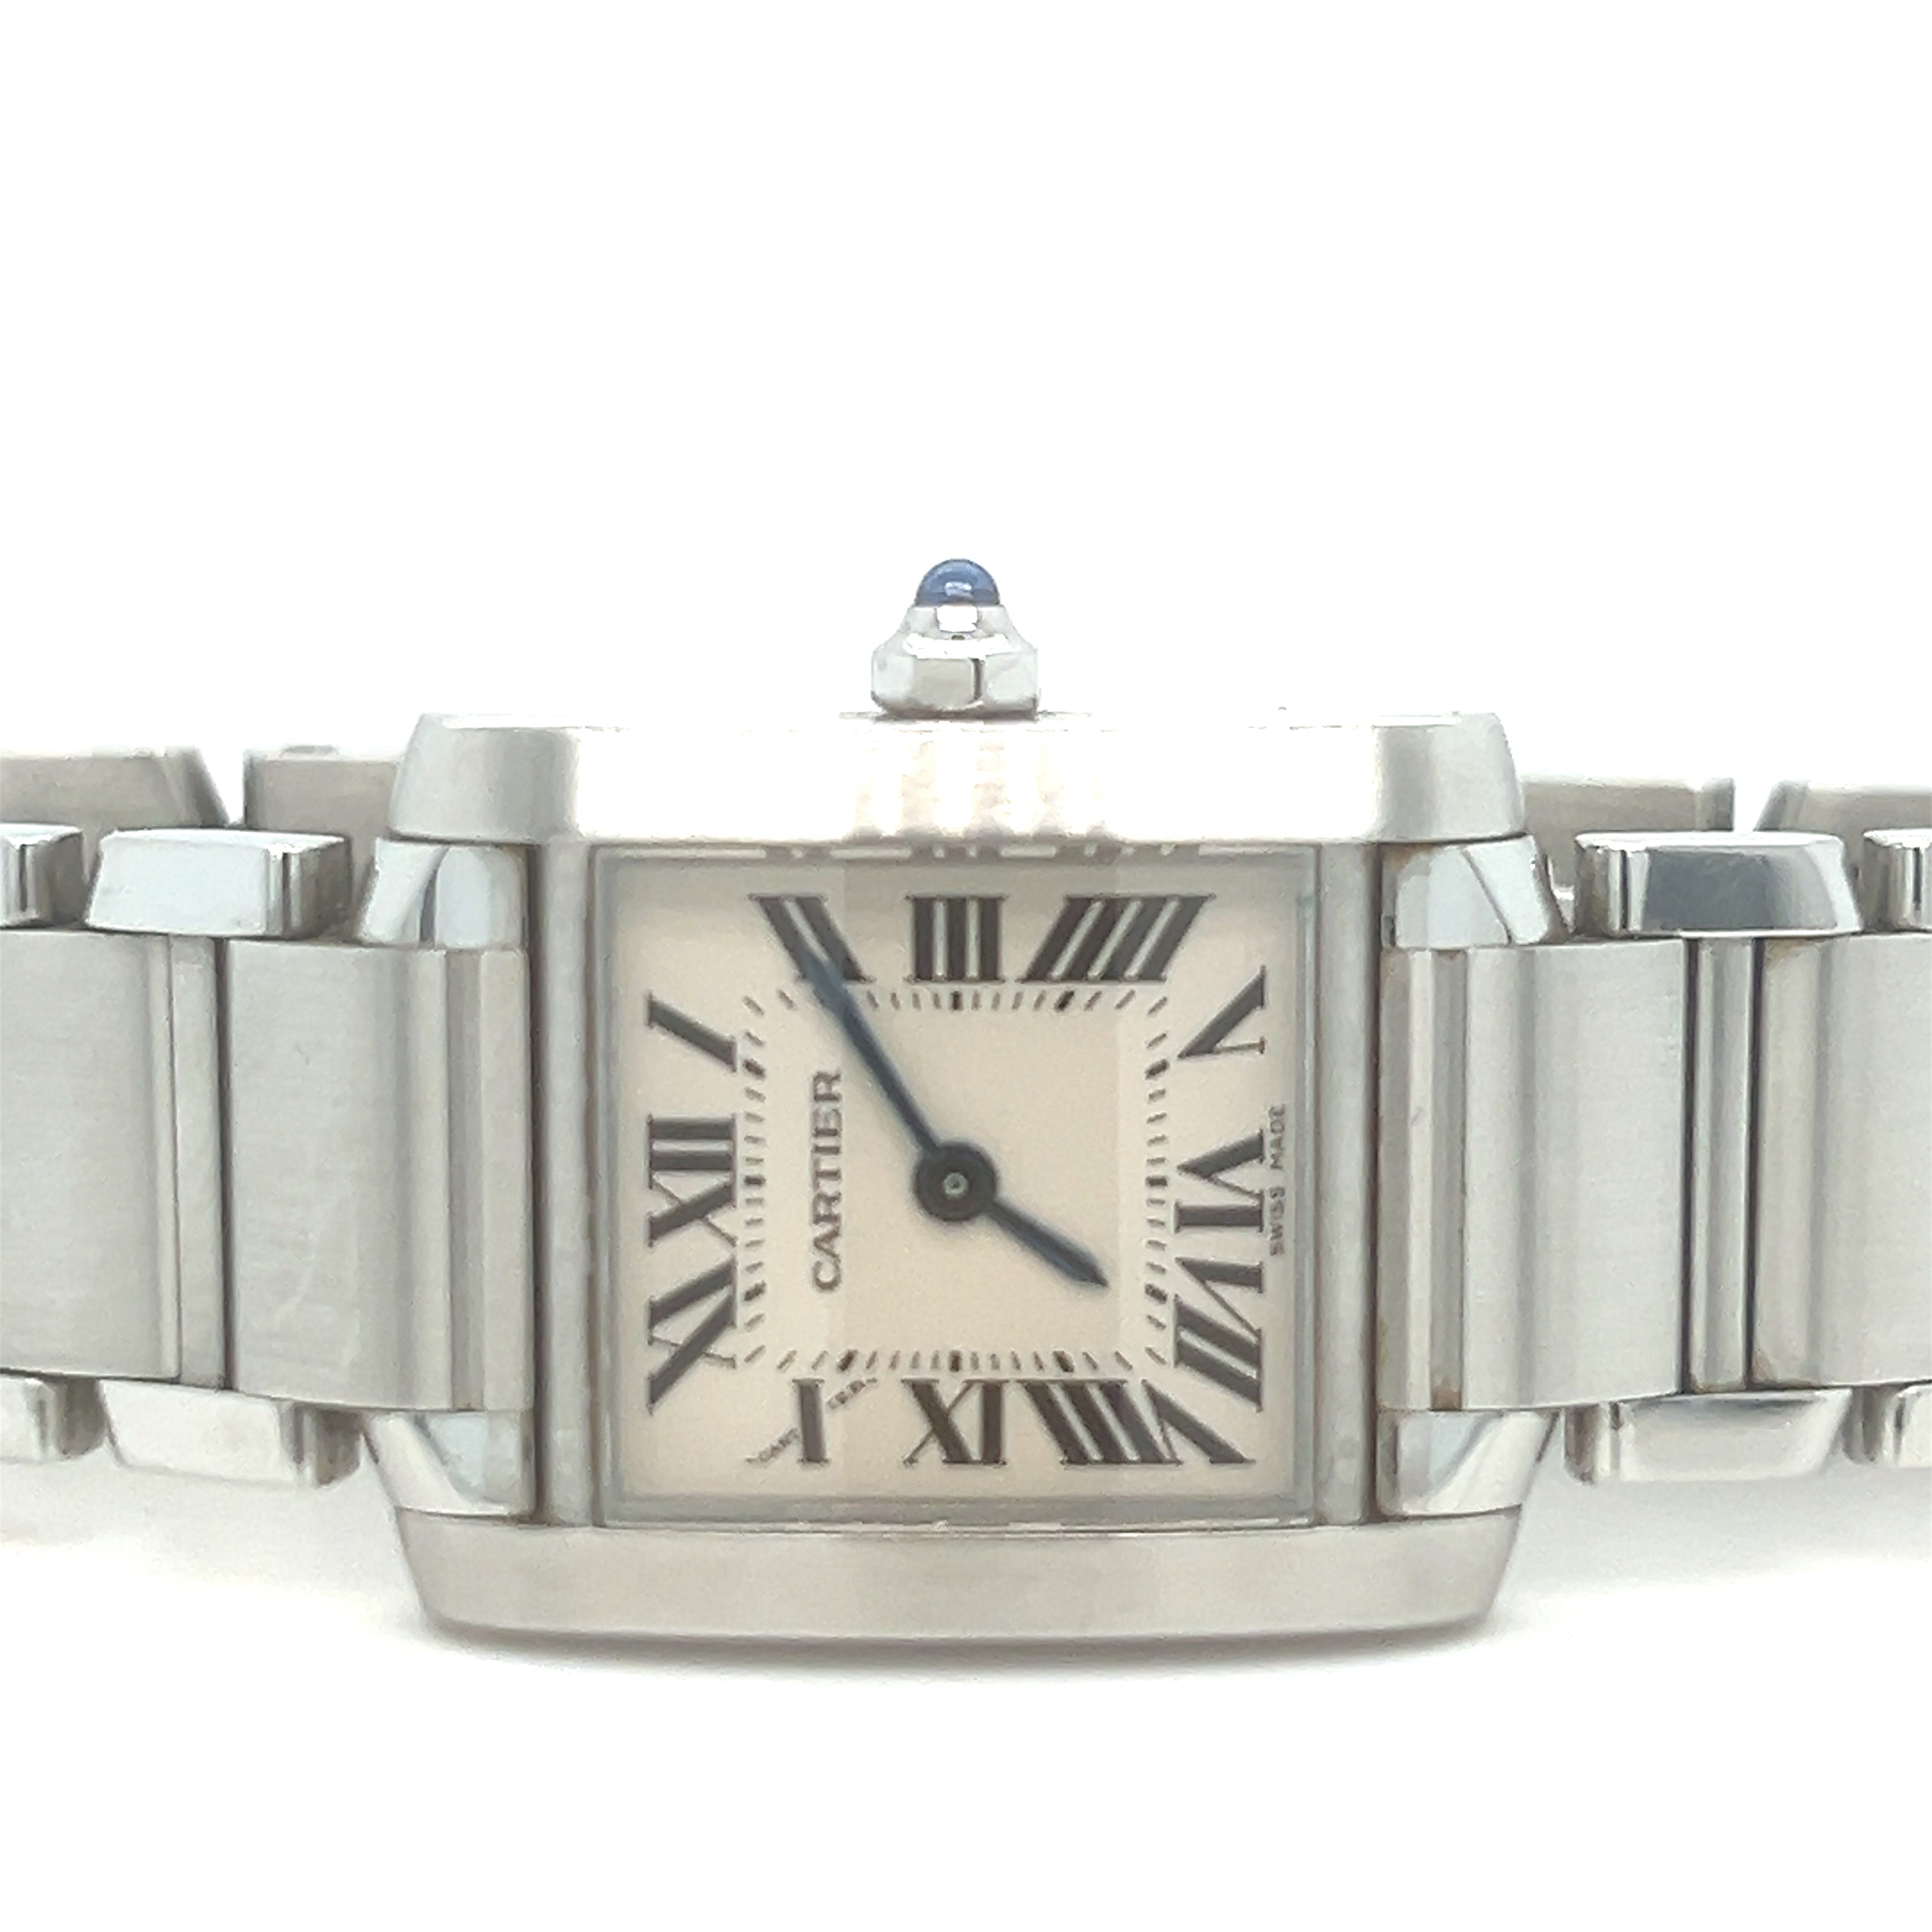 Ladies Cartier Tank Francaise - 2384 Small Model